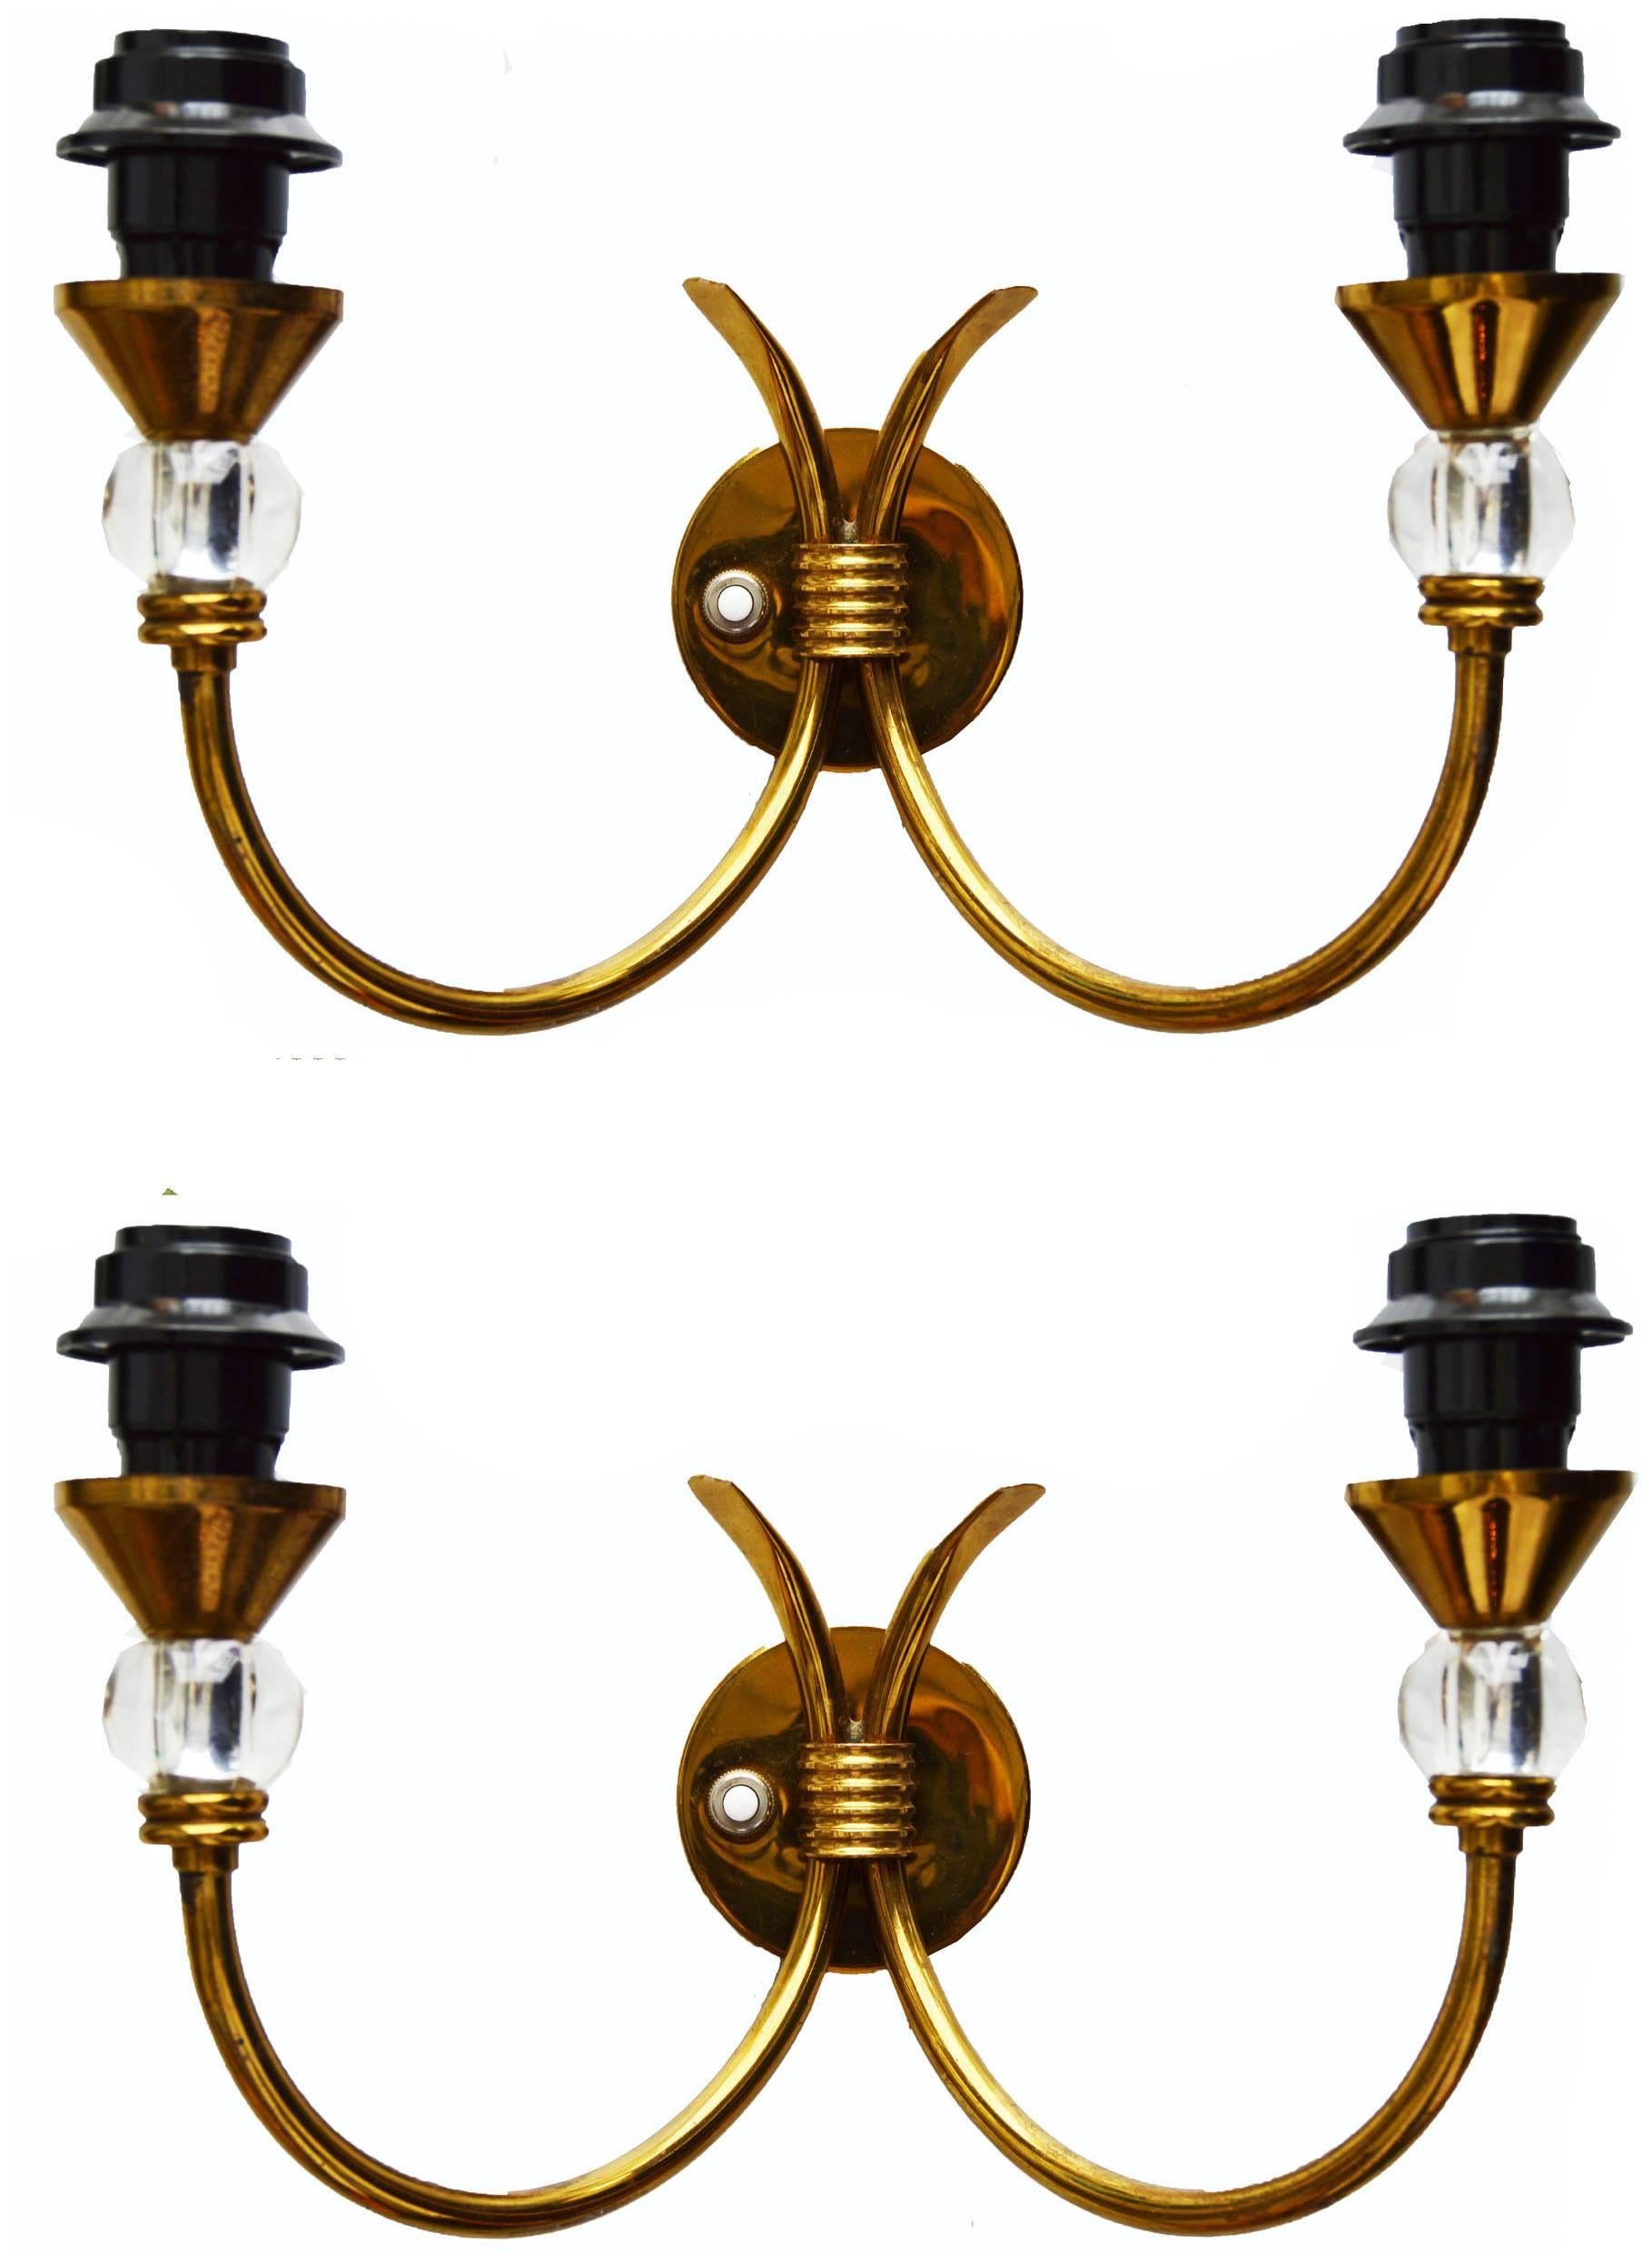 Pair of sconces by Maison Lunel.
US rewired and in working condition.
Two lights , 75 watt per bulb.
back plate ; 2.3/4 Diameter
Without shades : 6.5"H, 9"W, 6"D